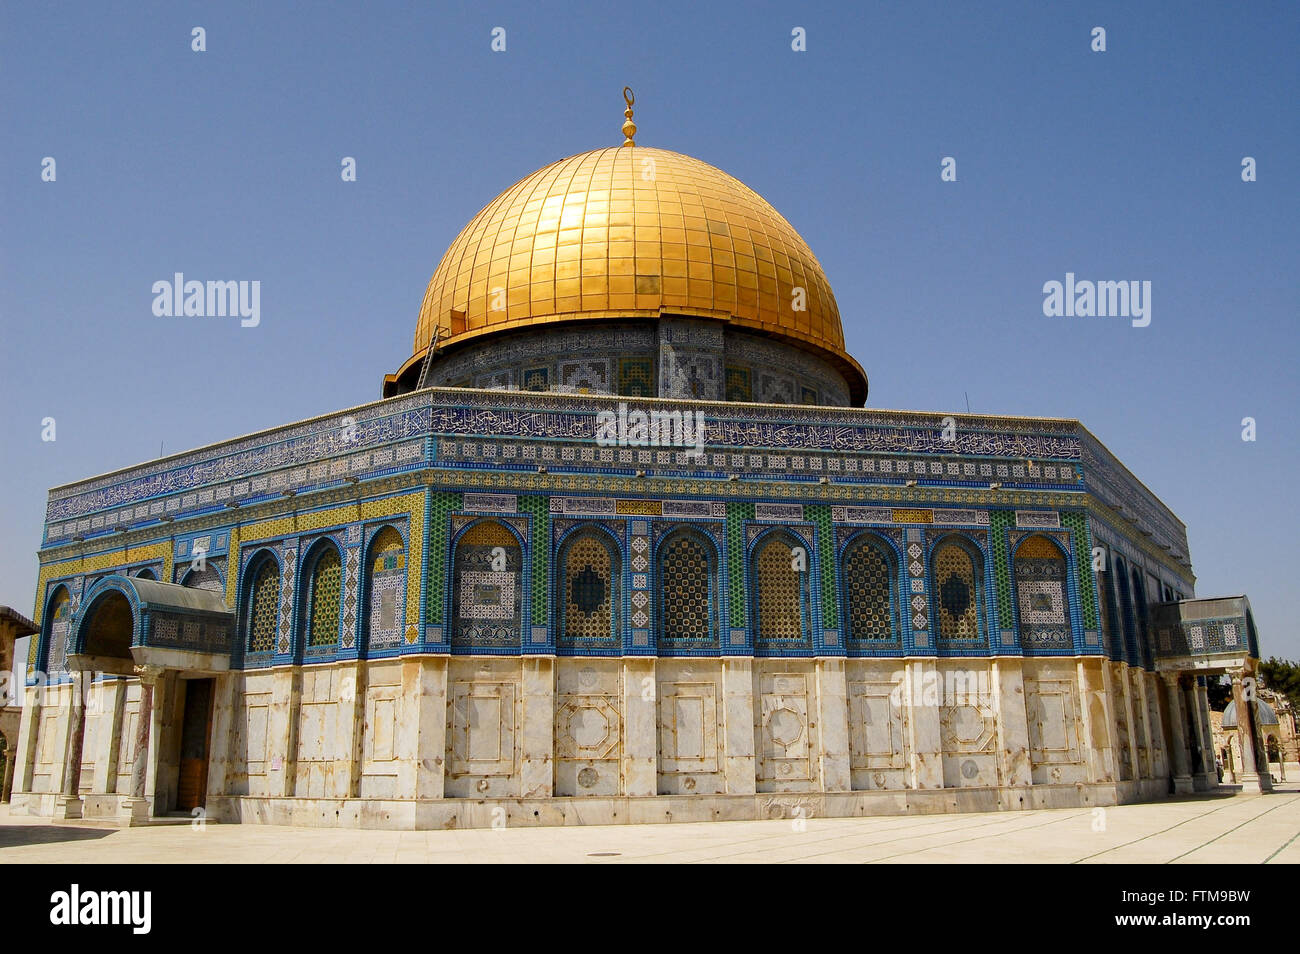 Great Mosque of Omar - Dome of the Rock in the Old City of Jerusalem Stock Photo